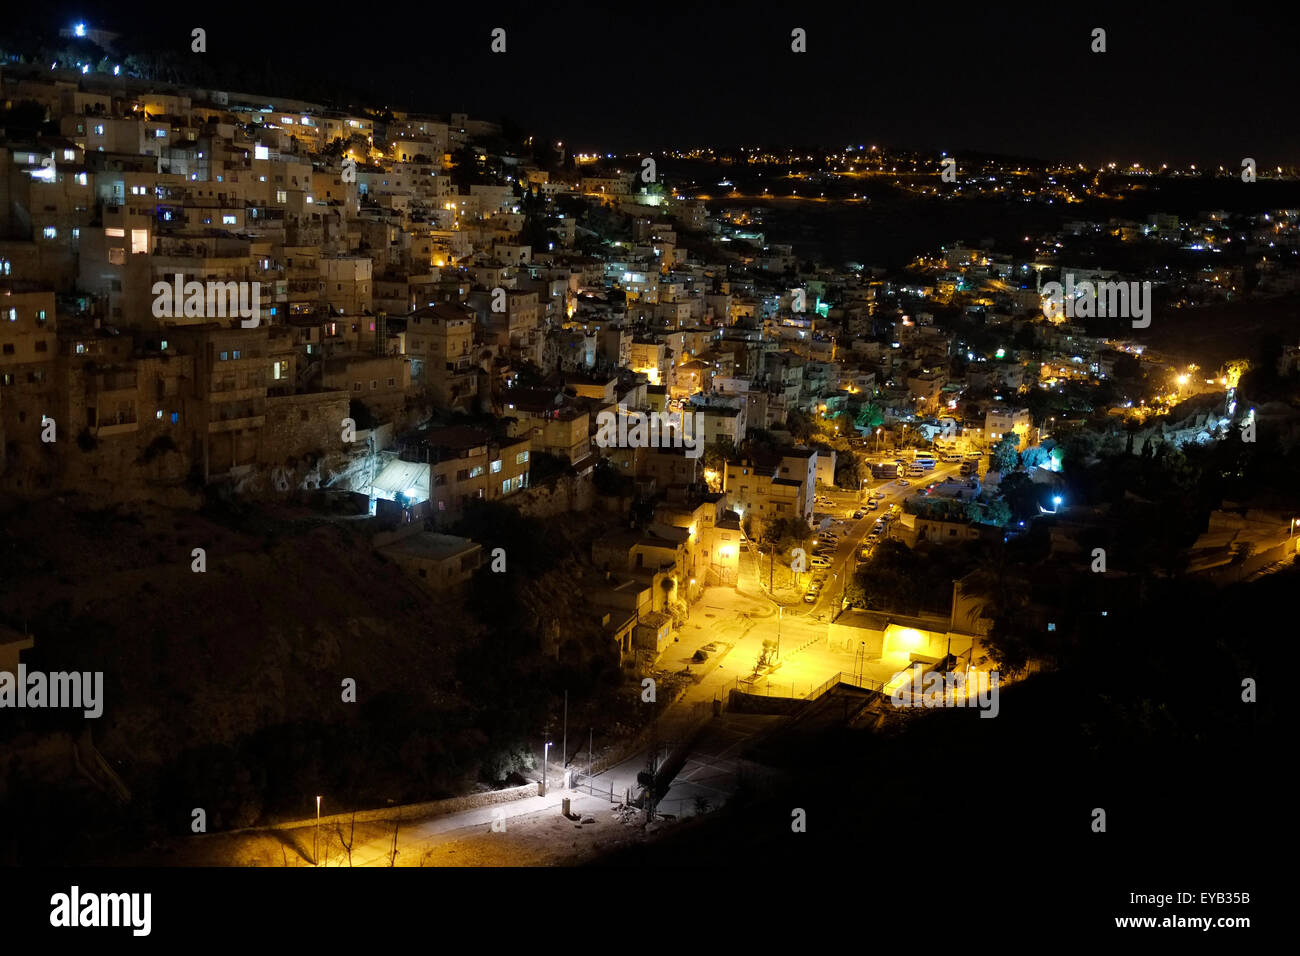 View at night of the Palestinian neighborhood of Silwan or Siloam a predominantly Palestinian neighborhood on the outskirts of the Old City of Jerusalem Israel Stock Photo